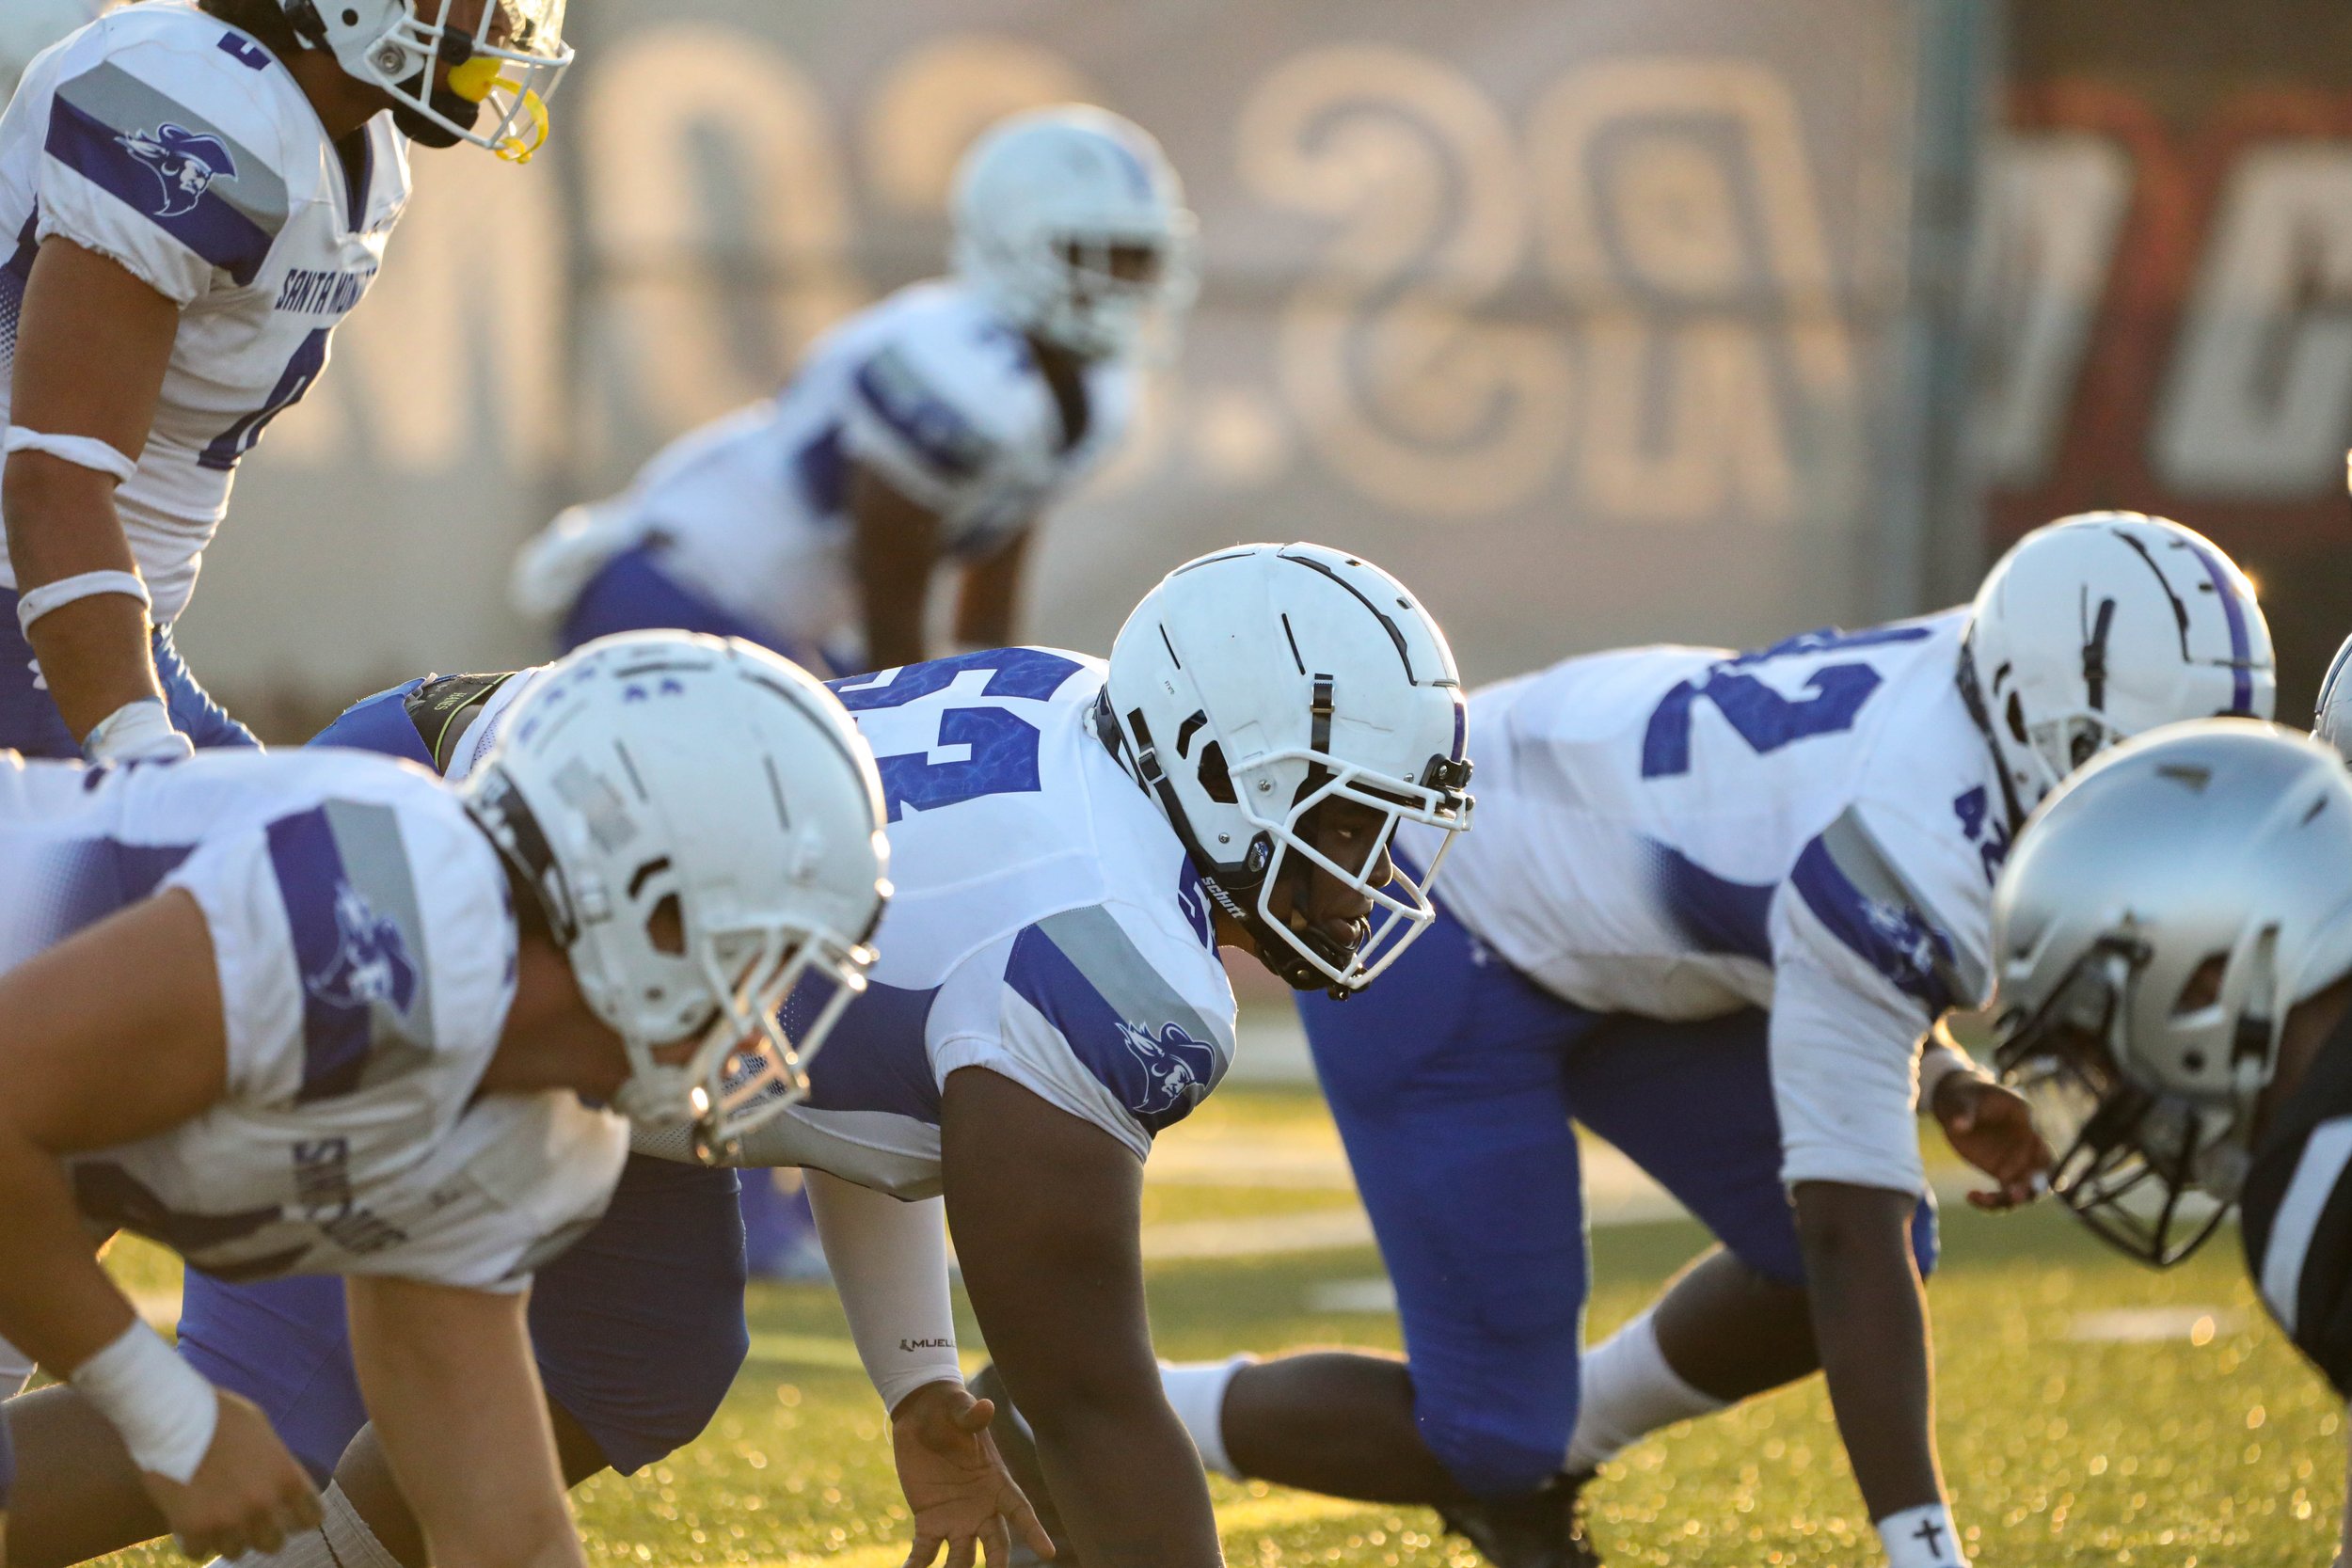  The Santa Monica College Corsair Football Defensive team getting ready to stop the Compton College Tartars Offensive team from advancing on Saturday, Sept. 17 at Compton, Calif. (Danilo Perez | The Corsair) 